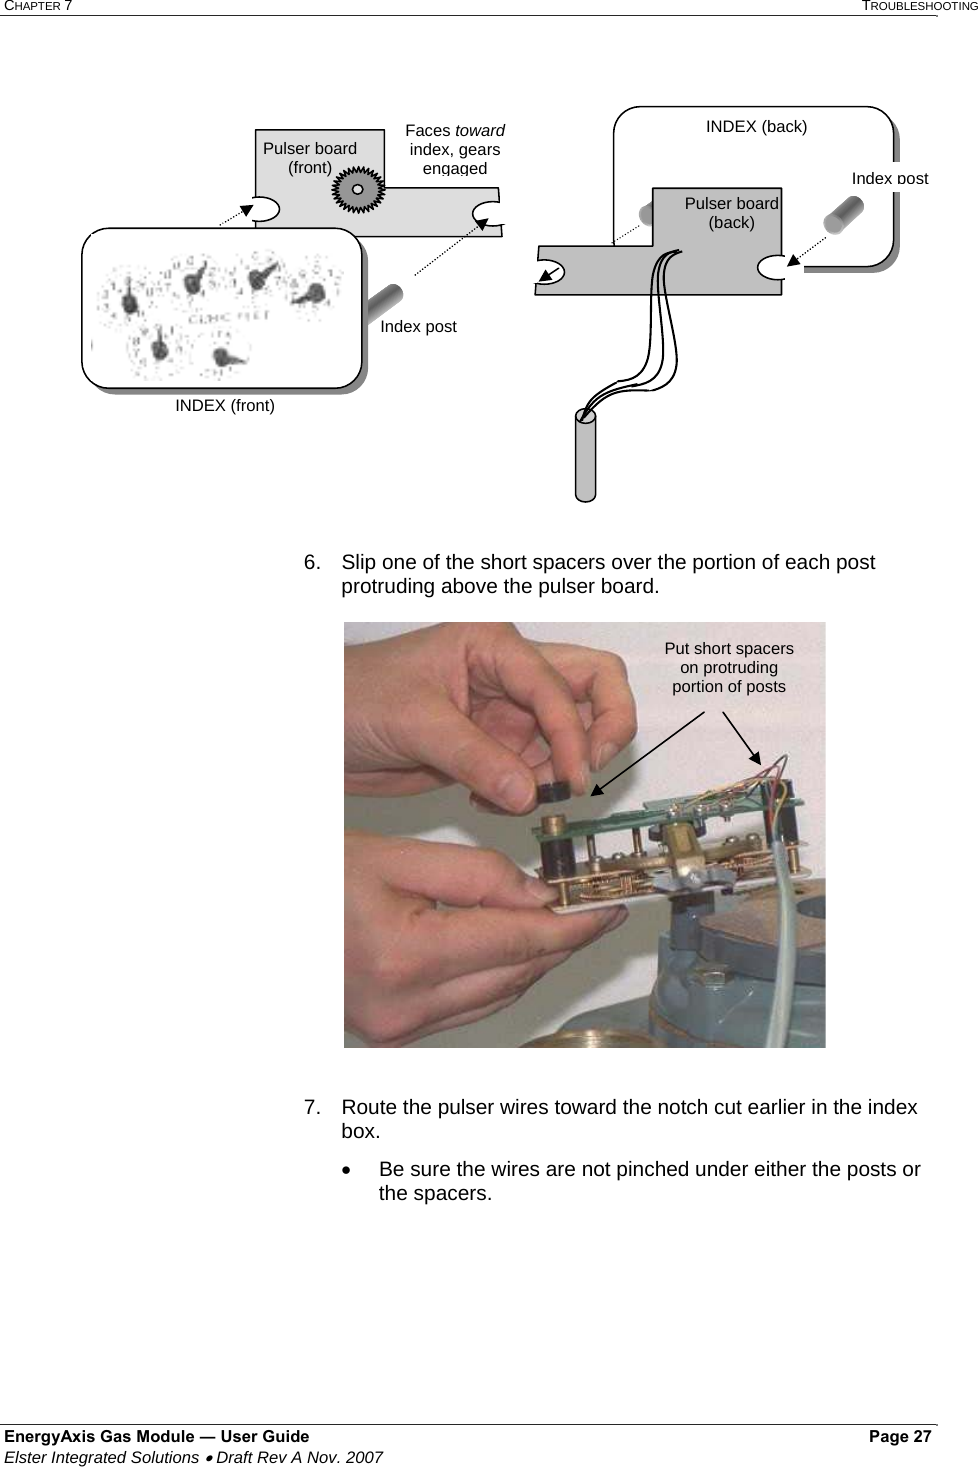 CHAPTER 7   TROUBLESHOOTING EnergyAxis Gas Module ― User Guide   Page 27  Elster Integrated Solutions • Draft Rev A Nov. 2007    6.   Slip one of the short spacers over the portion of each post protruding above the pulser board.     7.  Route the pulser wires toward the notch cut earlier in the index box. •  Be sure the wires are not pinched under either the posts or the spacers.  Put short spacers on protruding portion of posts  Pulser board (front) Faces toward index, gears engagedINDEX (back)  INDEX (front) Pulser board (back) Index post Index post